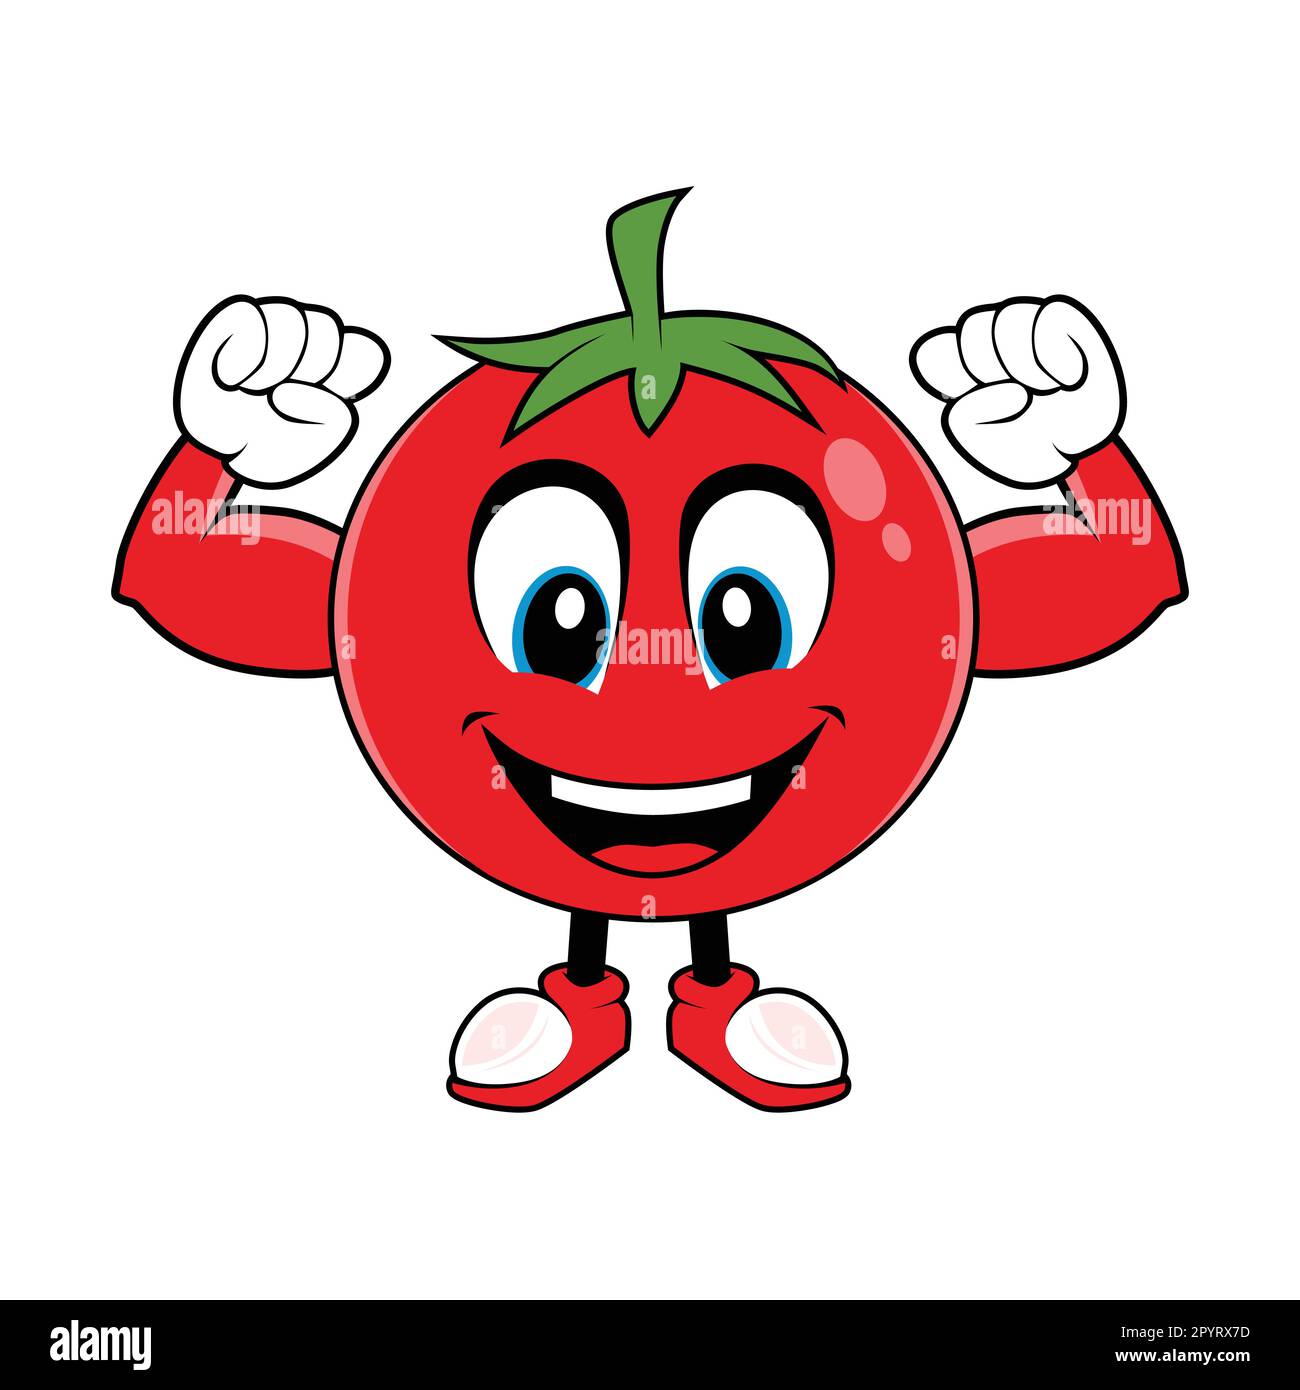 Smiling Tomato Fruit Cartoon Mascot mascot with Muscle Arms. Vector illustration of red tomato character with various cute expression Stock Vector